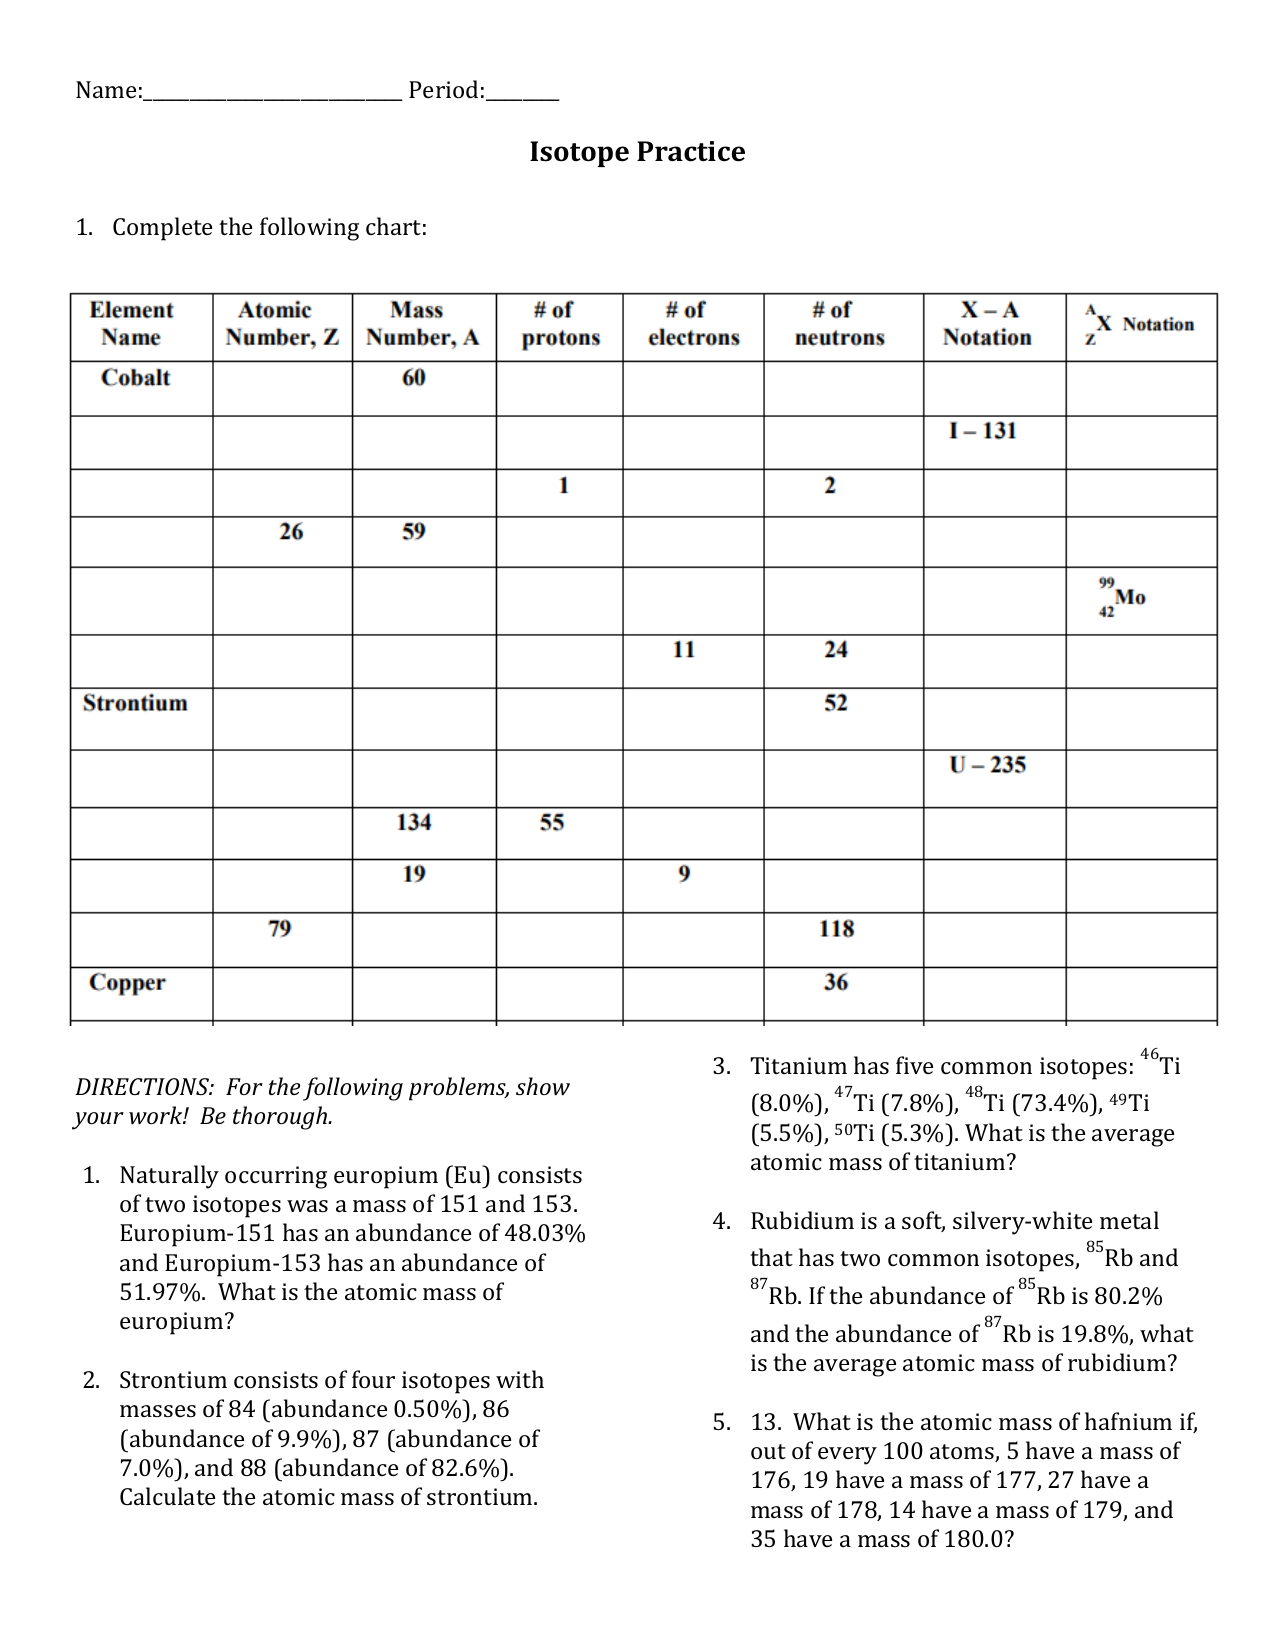 ISOTOPES-25th With Regard To Isotope Practice Worksheet Answer Key